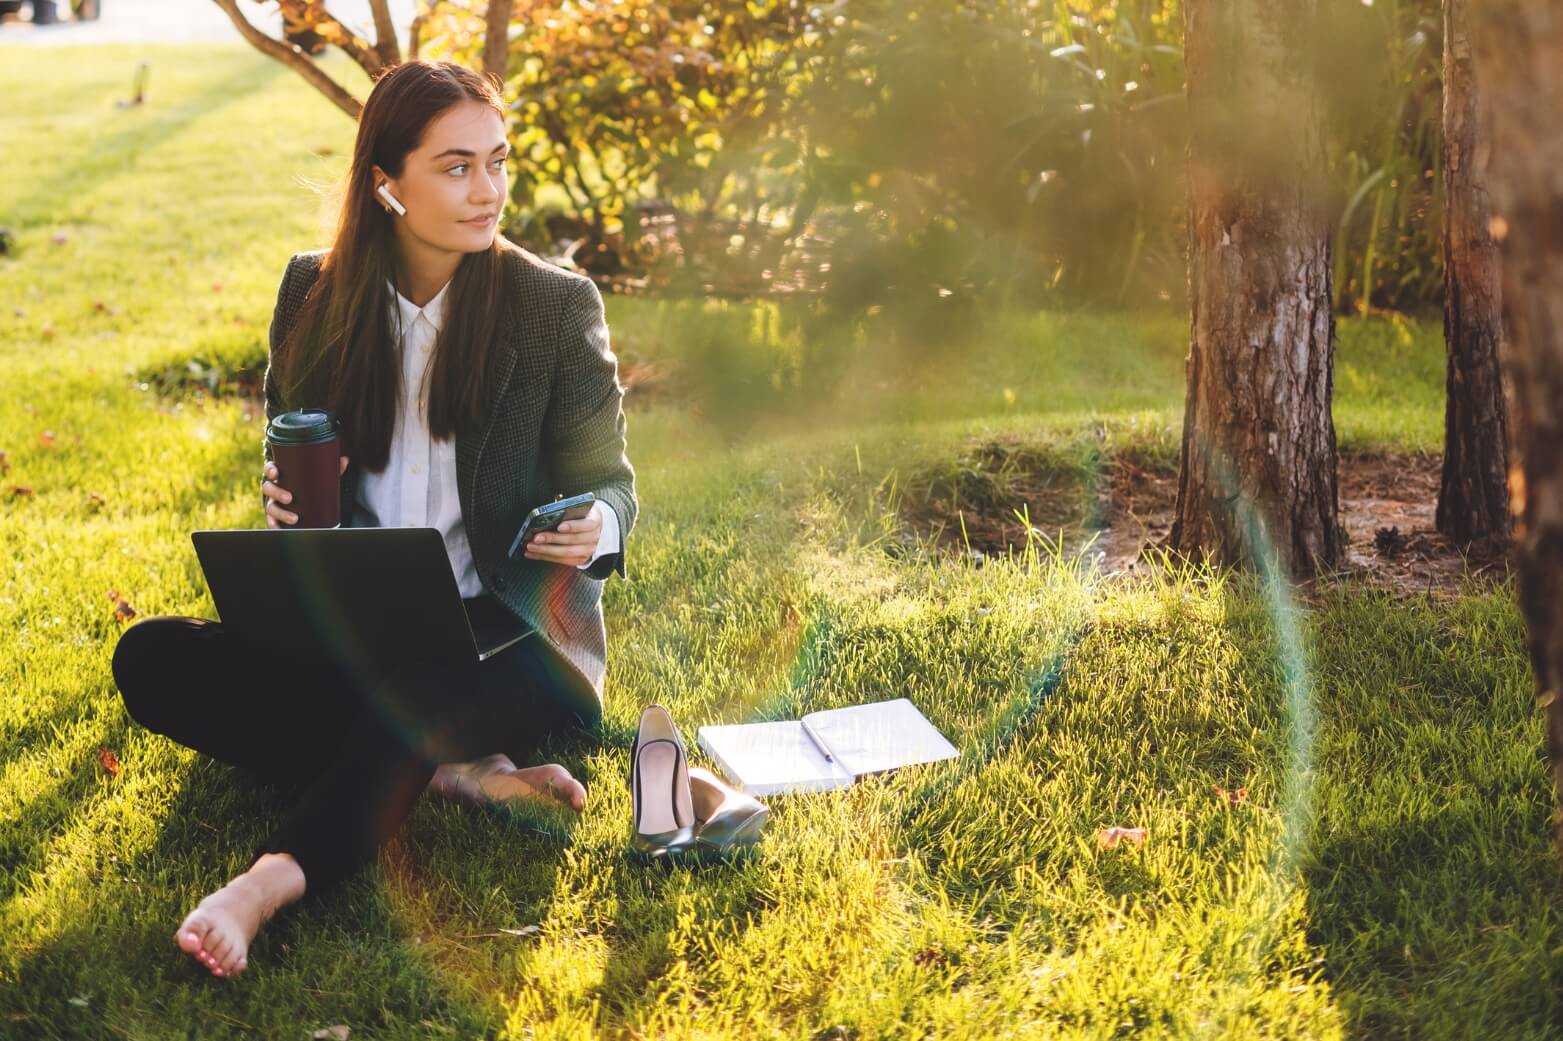 Woman in a suit sitting out in field working on computer 